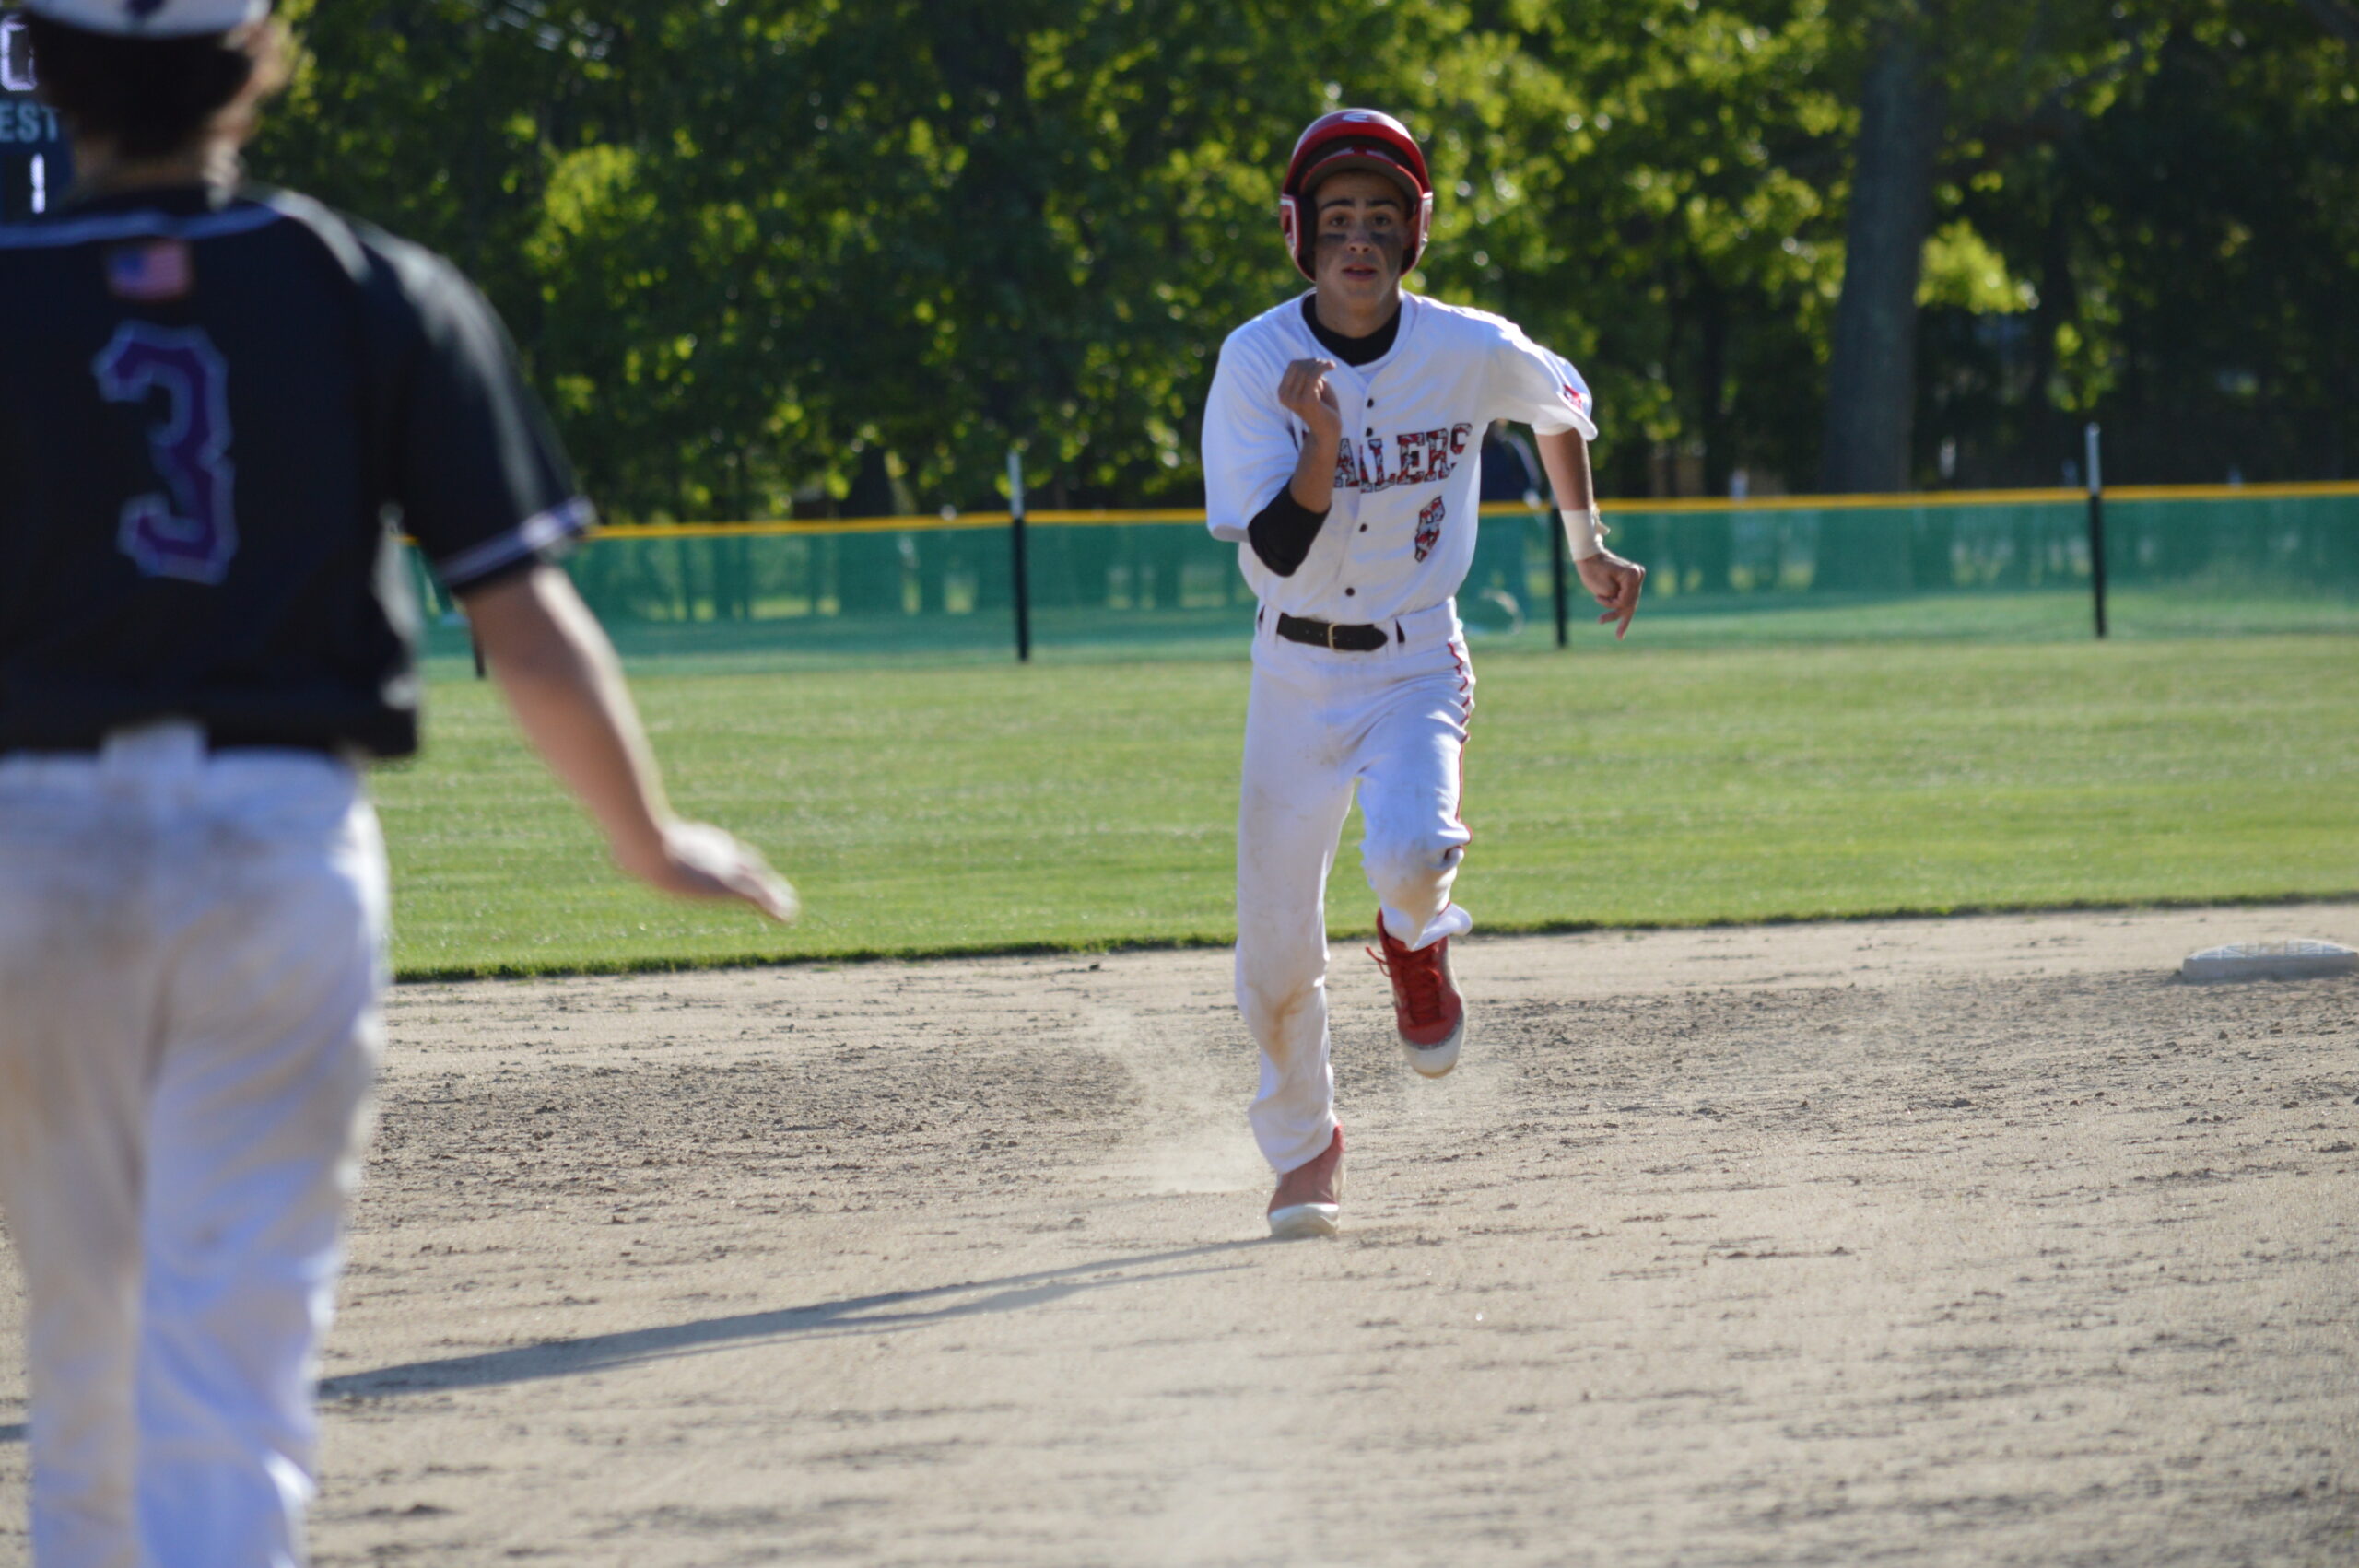 Brendan Burke heads toward third base in the bottom of the fifth inning of Pierson’s 2-1 win over Port Jeff on Tuesday.